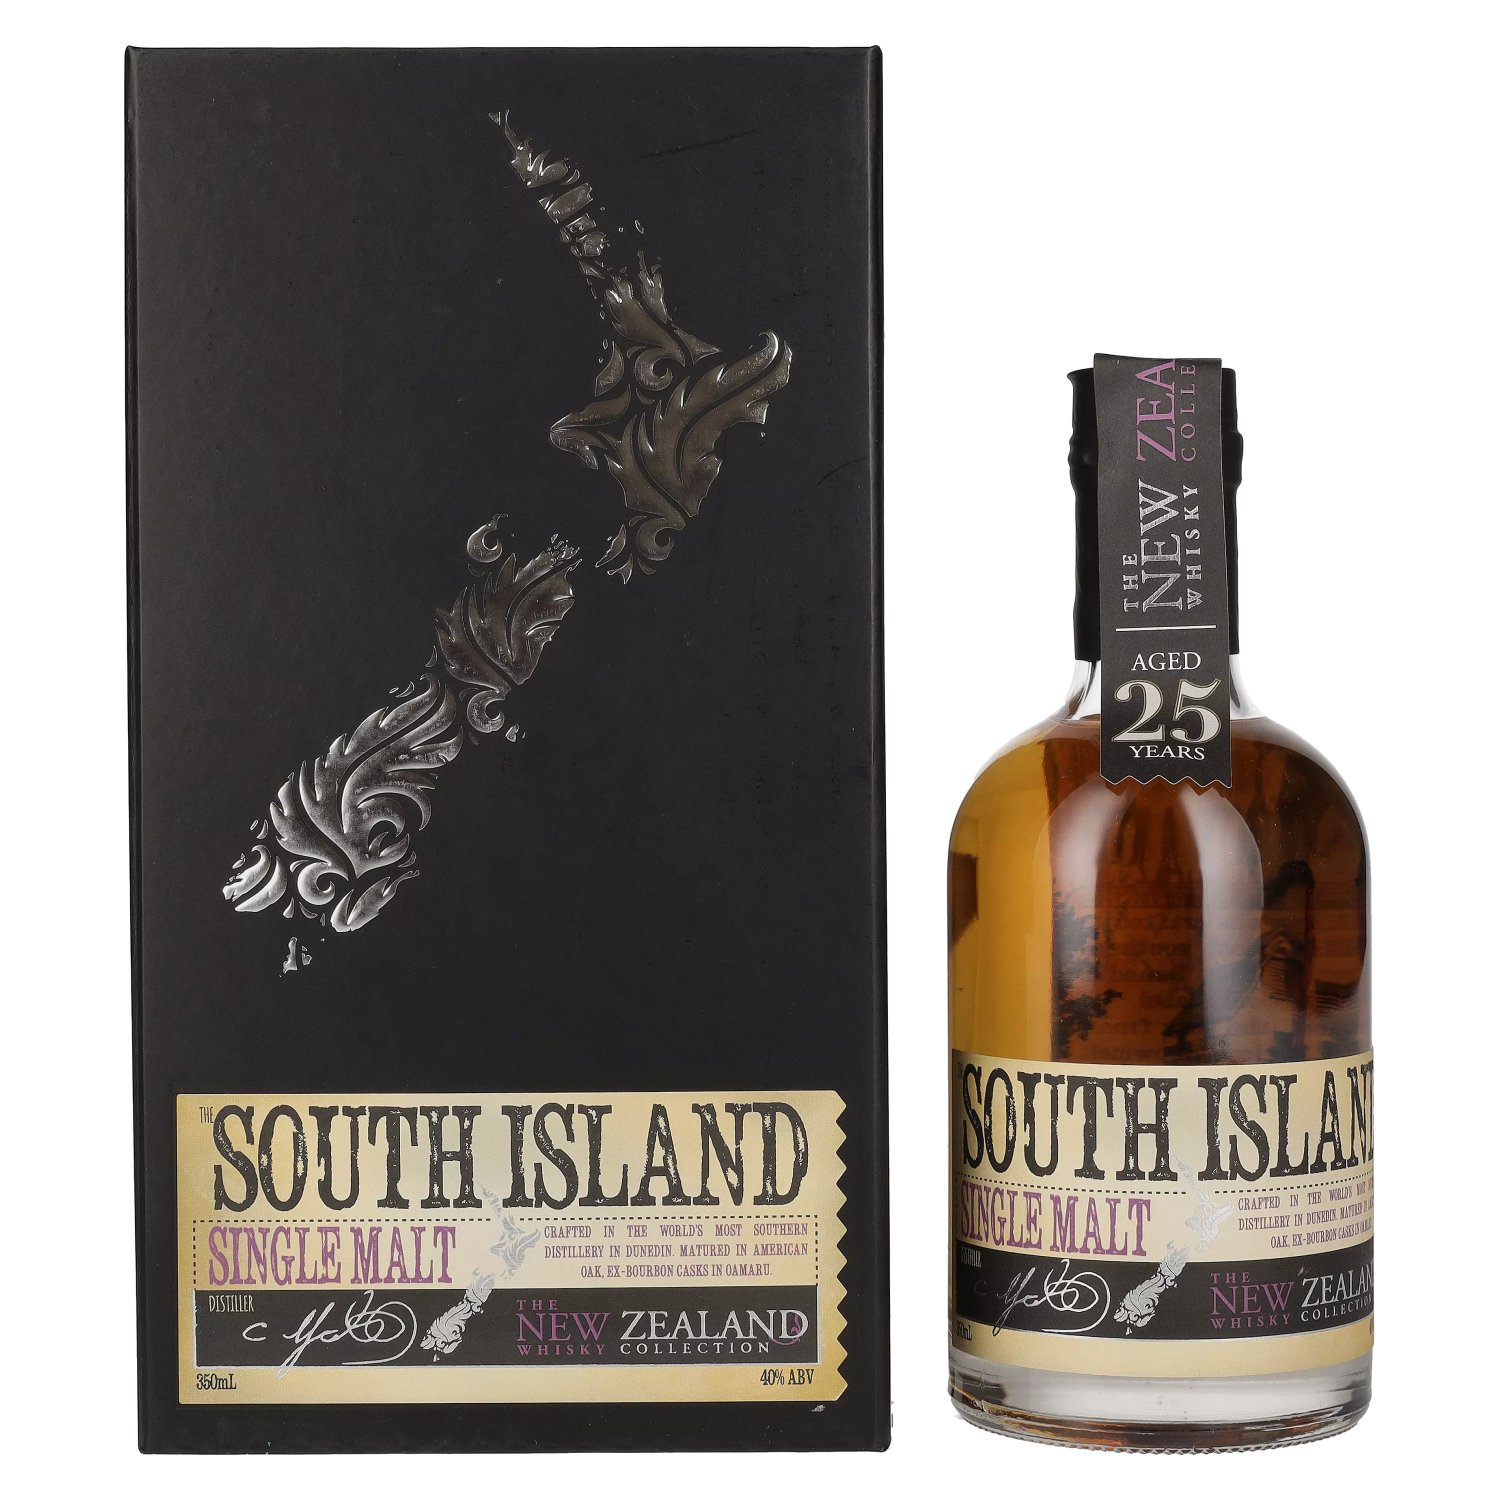 The Whisky Years New ISLAND Old Vol. Geschenkbox 40% 25 Malt in 0,35l Single SOUTH Zealand